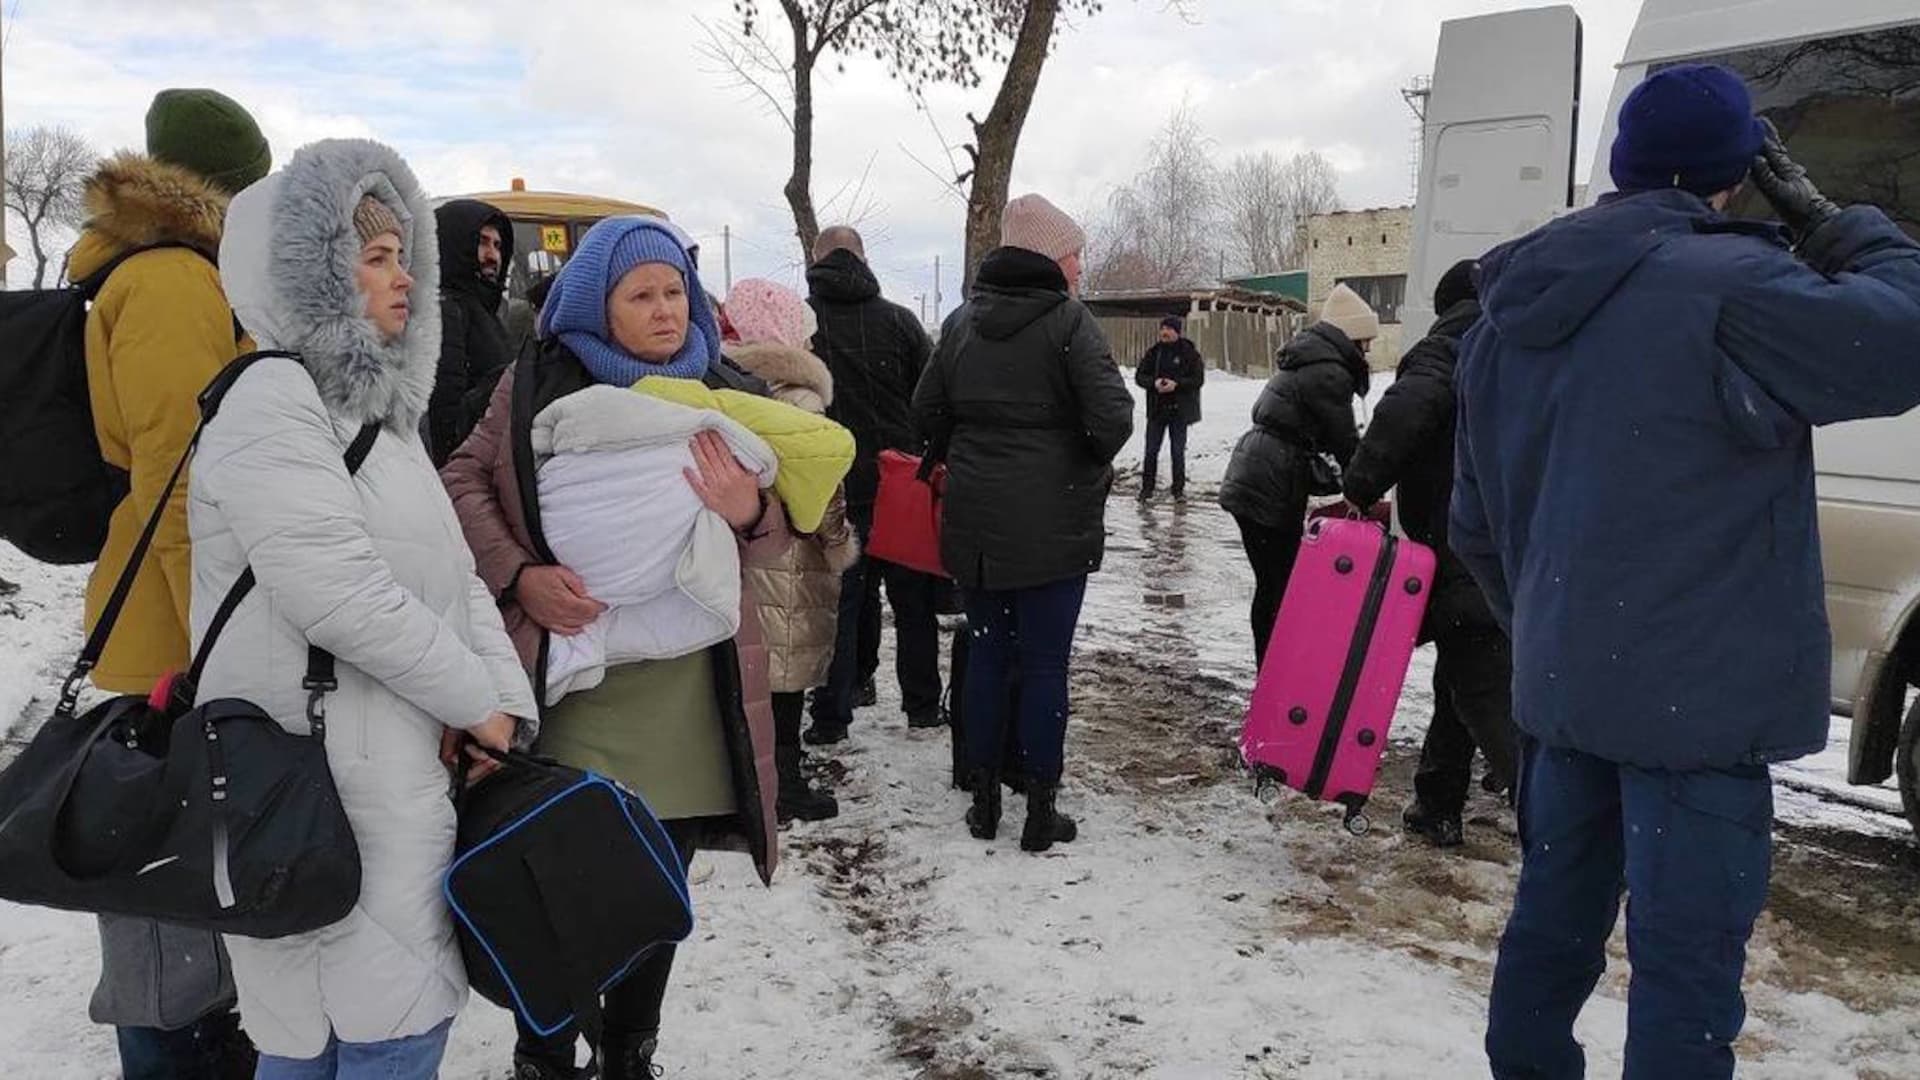 Civilians flee the city after temporary ceasefire announced on March 8, 2022 in Sumy, Ukraine.